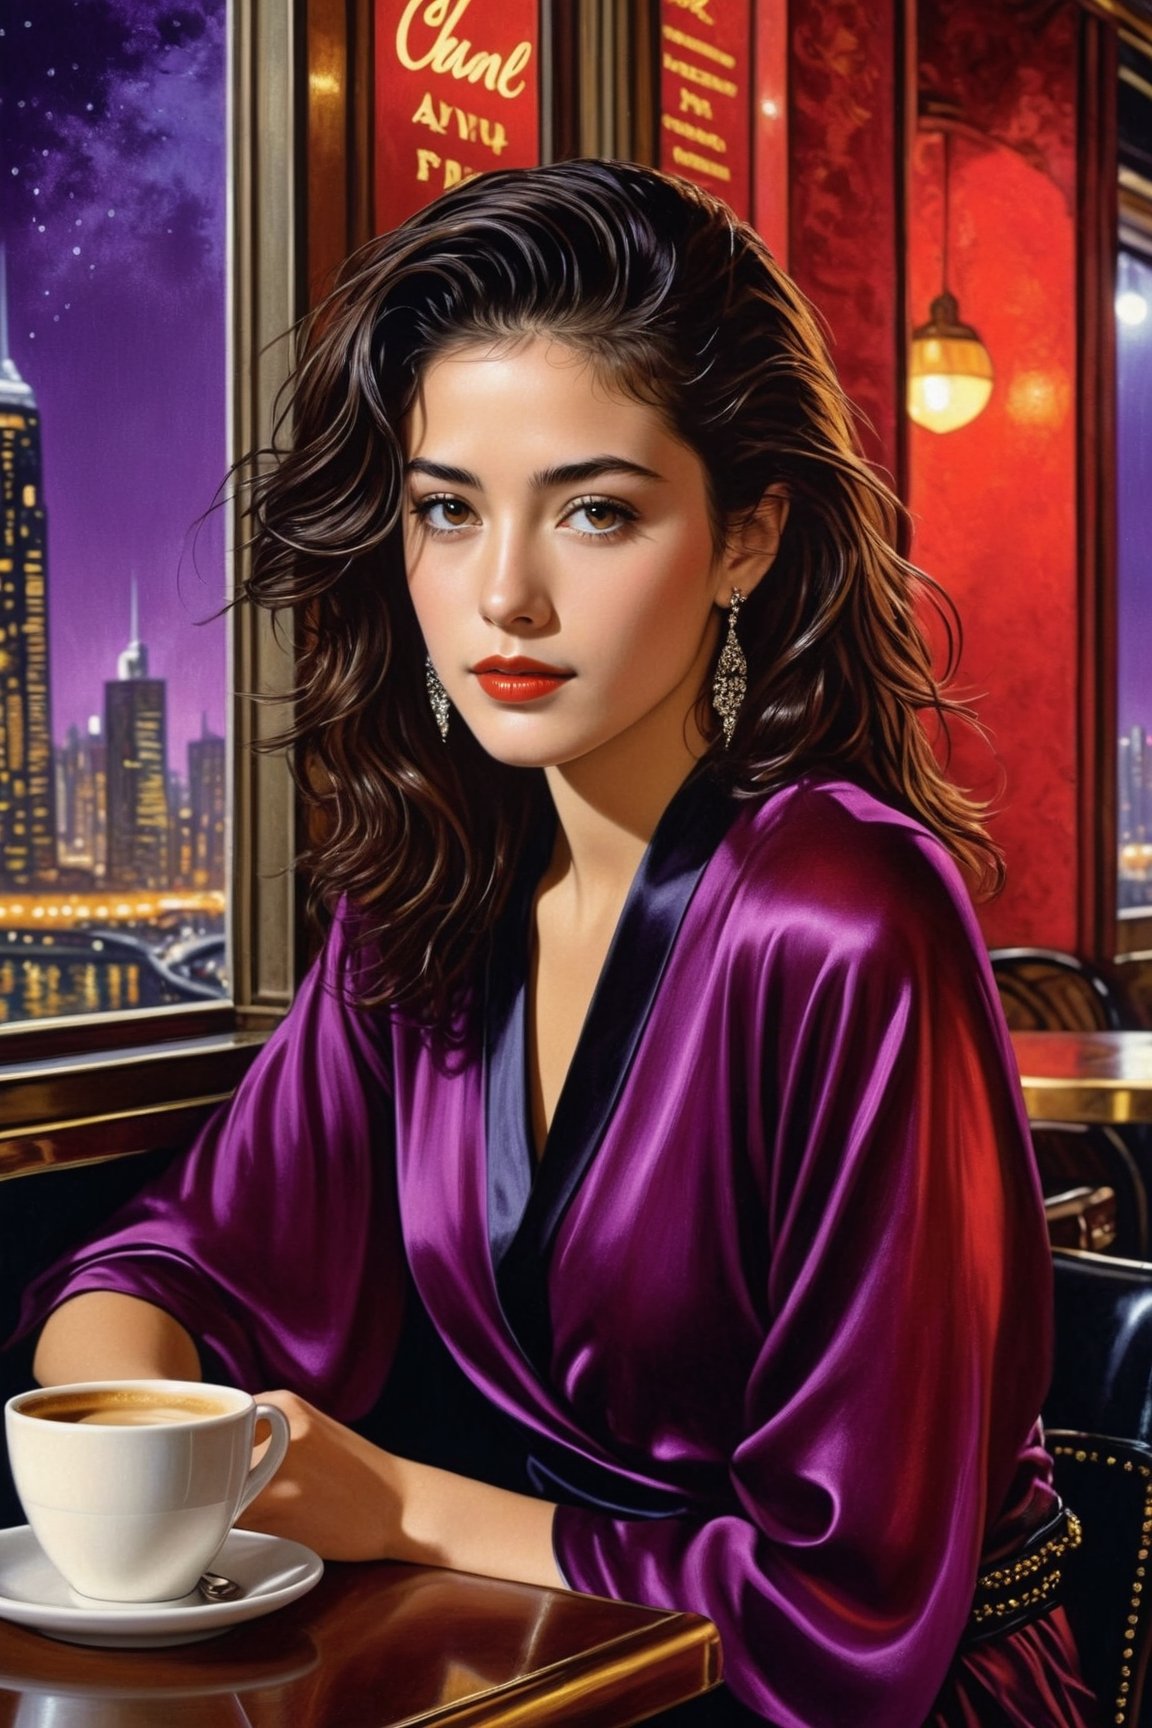 Hyper-Realistic photo of a girl sitting in a cafe at night,20yo,1girl,solo,Sean Young \(in Blade Runner\),detailed exquisite face,detailed soft shiny skin,lips,smile,perfect female form,looking at viewer,disheveled long black hair blowing,[Deep Purple and Wine Red color],elegant dress,chanel,prada,close up
BREAK
backdrop of beautiful city skyscrapers,table,coffee mug,vase,book
BREAK
(rule of thirds:1.3),perfect composition,studio photo,trending on artstation,depth of perspective,(Masterpiece,Best quality,32k,UHD:1.4),(sharp focus,high contrast,HDR,hyper-detailed,intricate details,ultra-realistic,award-winning photo,ultra-clear,kodachrome 800:1.3),(chiaroscuro lighting:1.3),by Antonio Lopez, Diego Koi, Karol Bak and Hayao Miyazaki,photo_b00ster, real_booster,art_booster